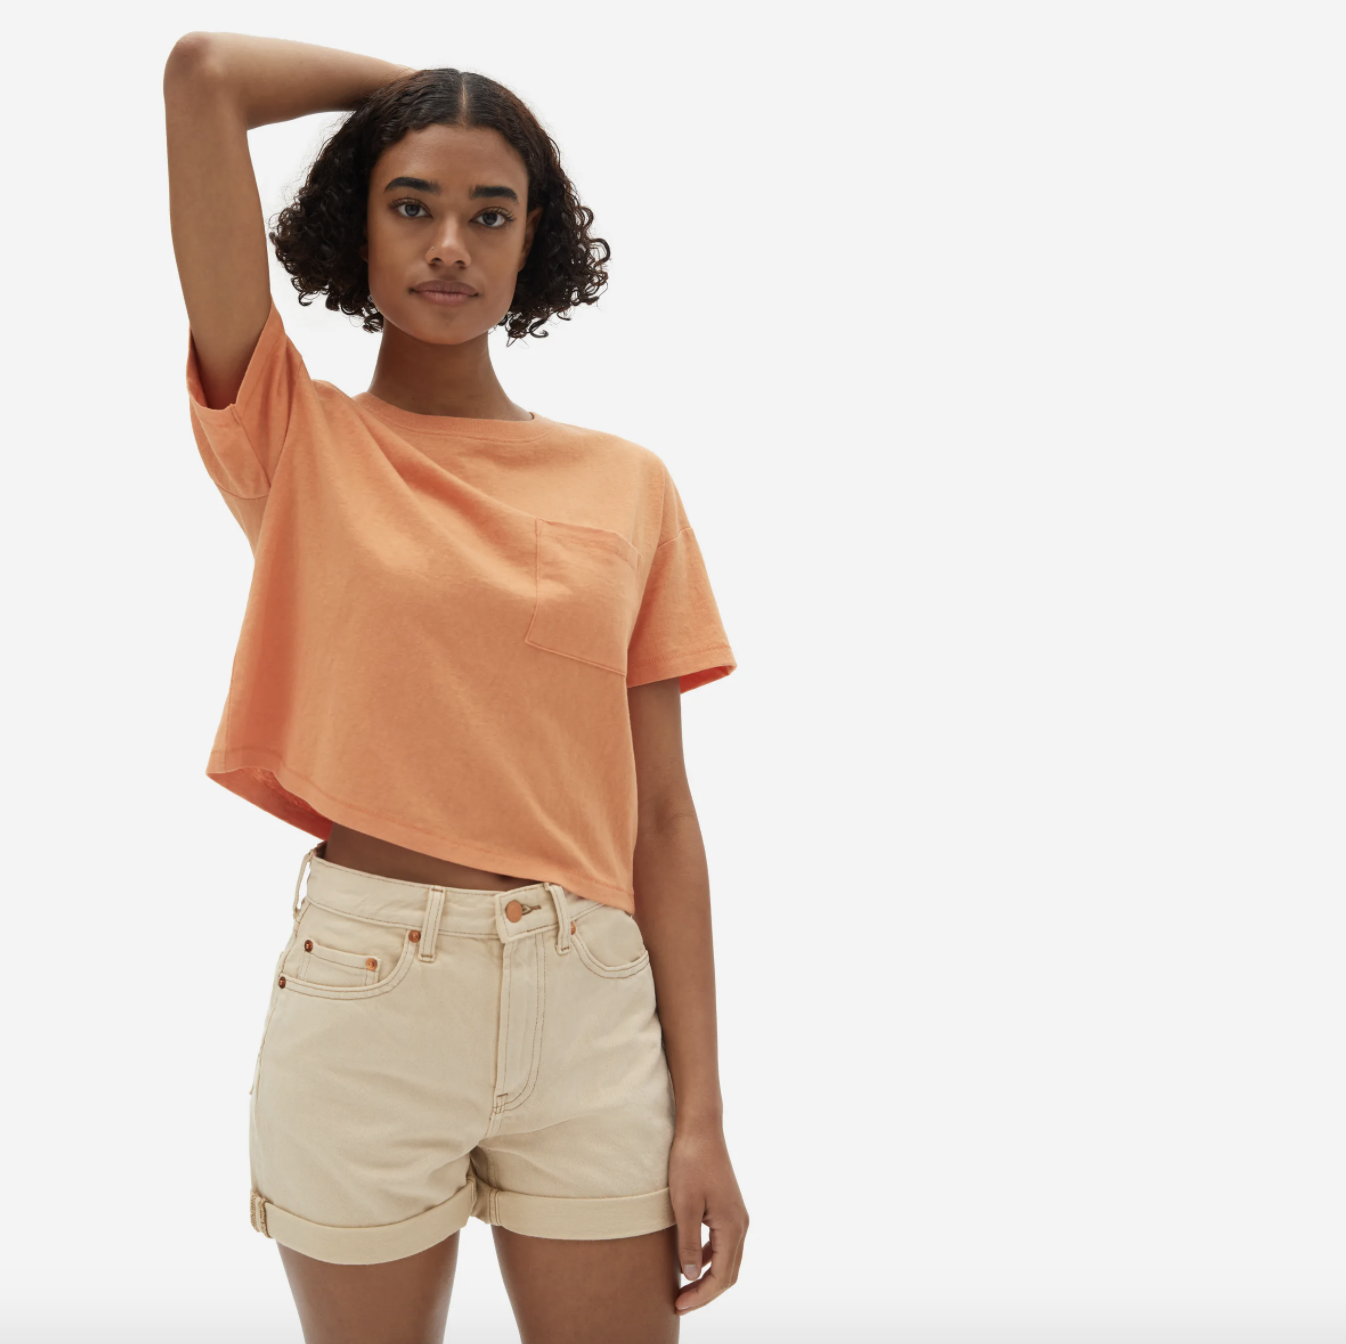 Model wearing the top in melon with shorts